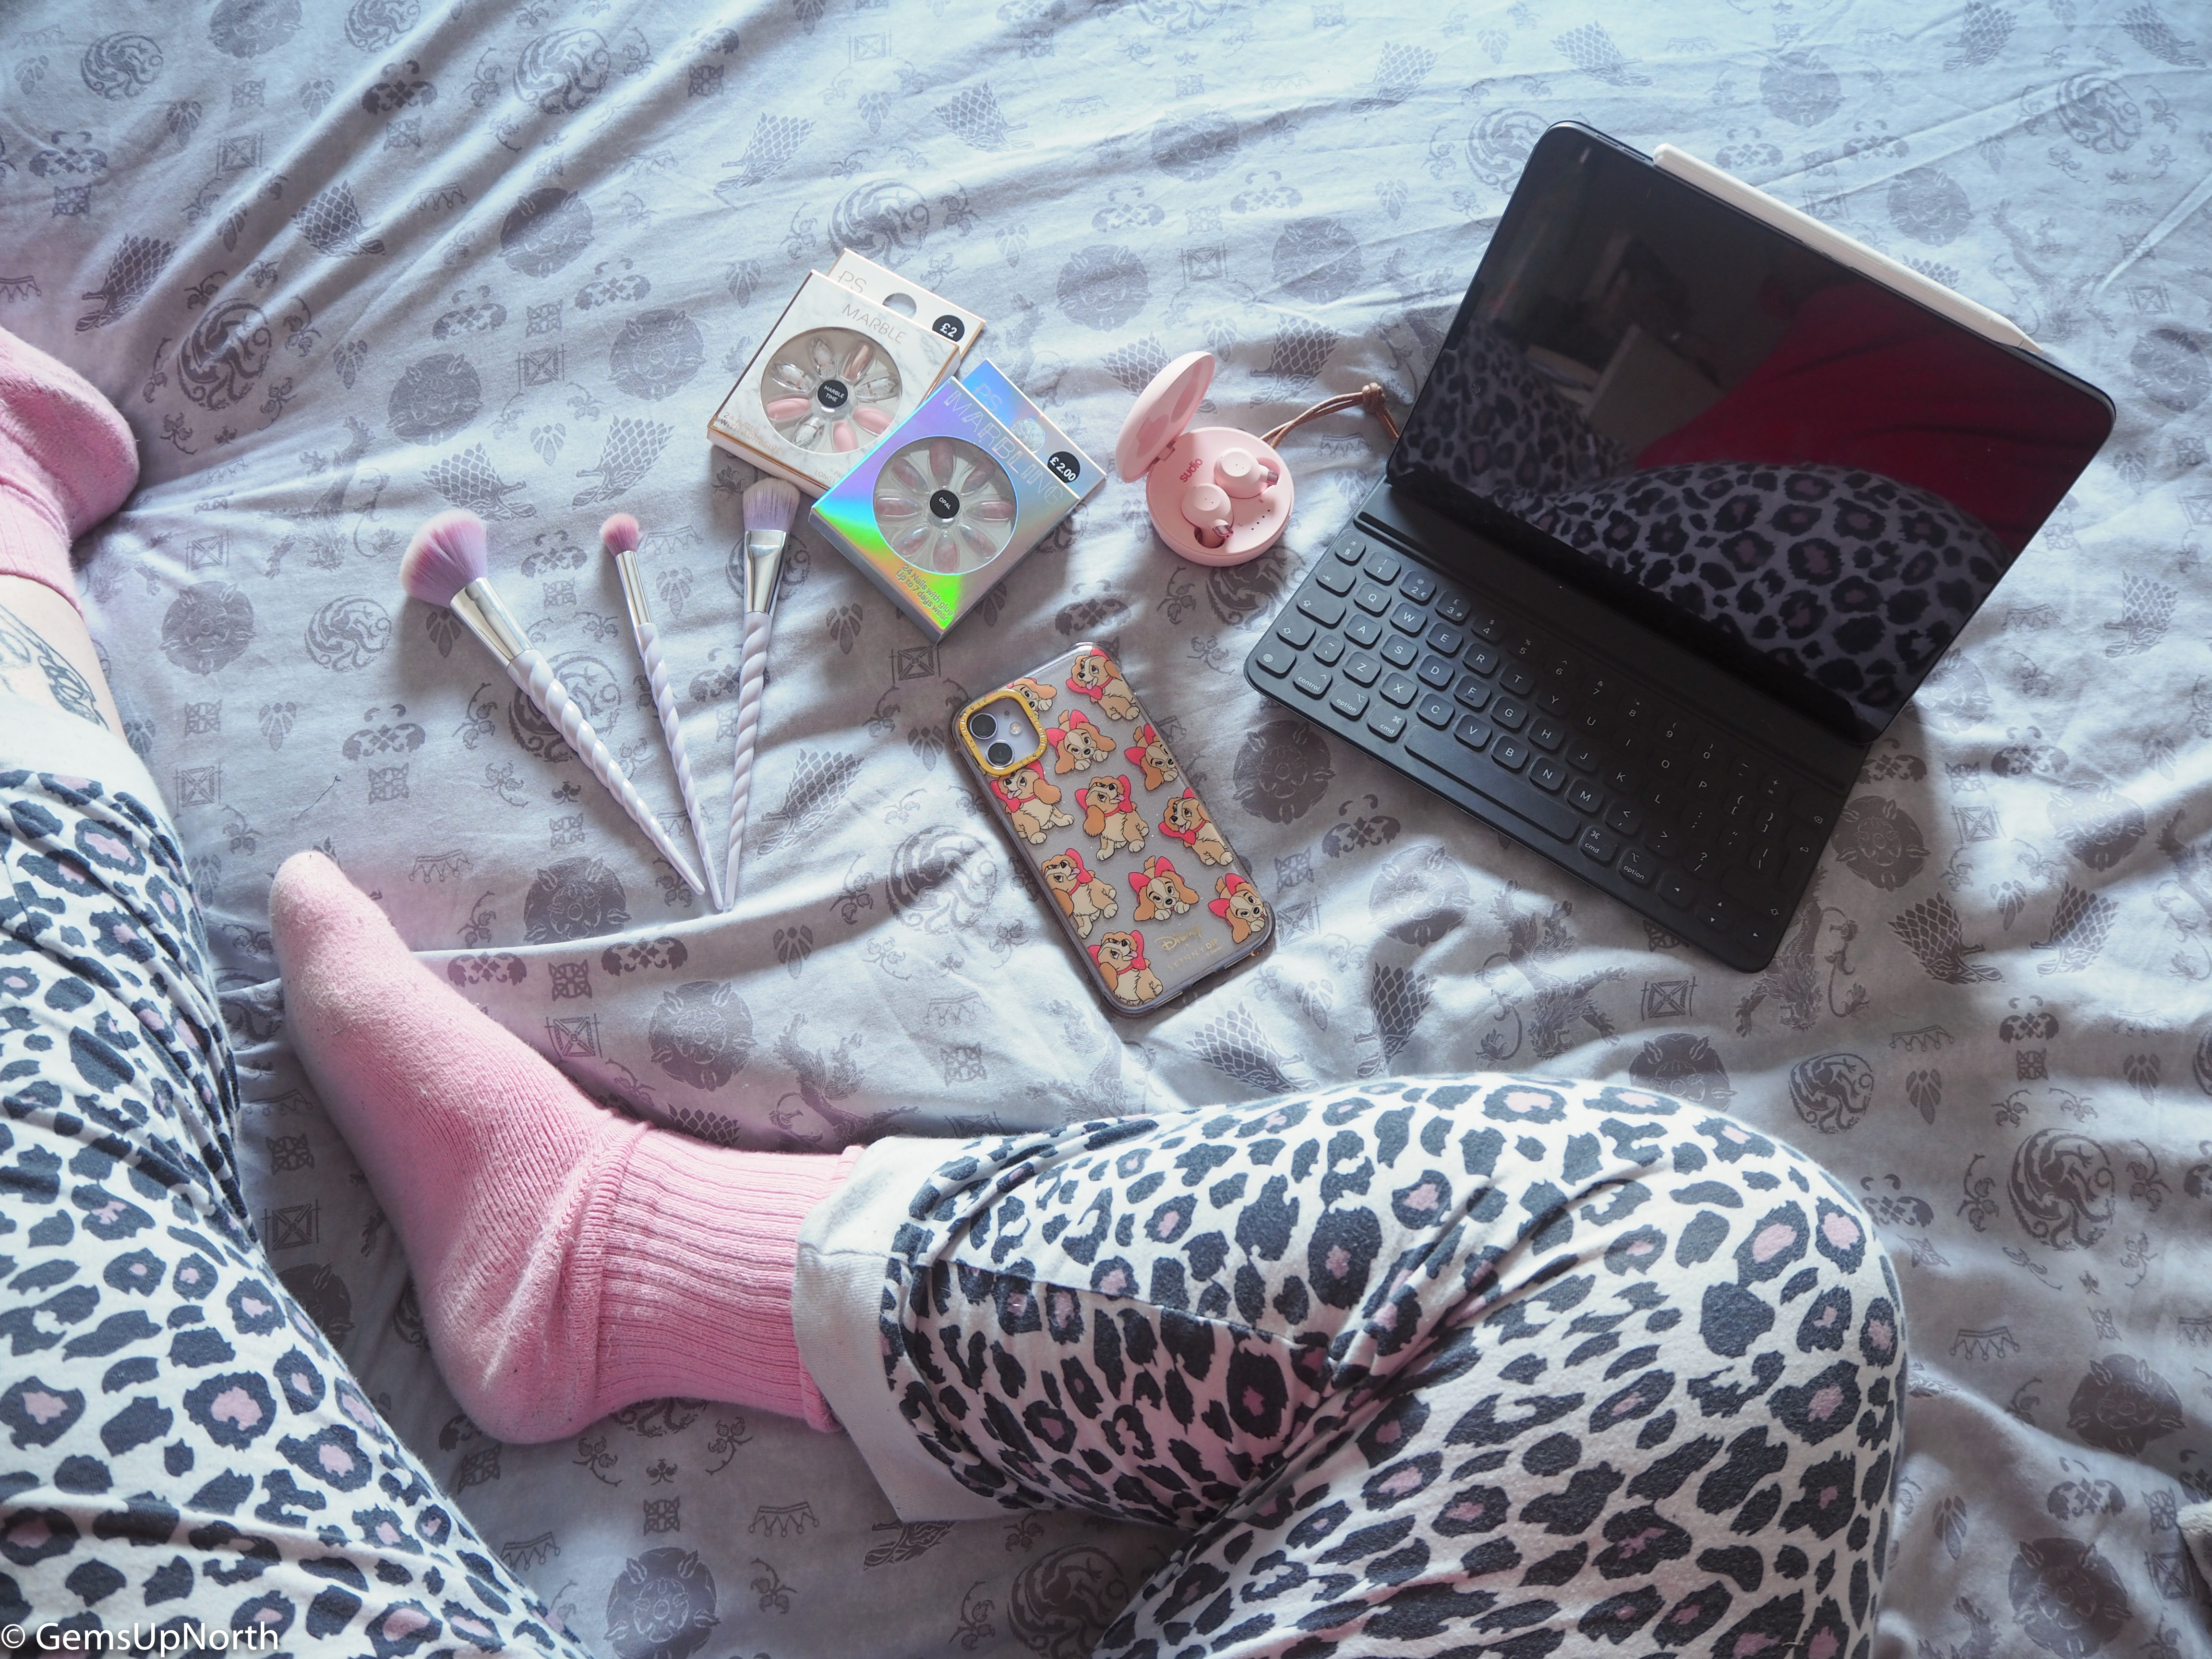 Shot of GemsUpNorth's leg with leopard print PJs on, FEM Sudio ear buds, iPad, Phone and some beauty bits on a GOT bed set